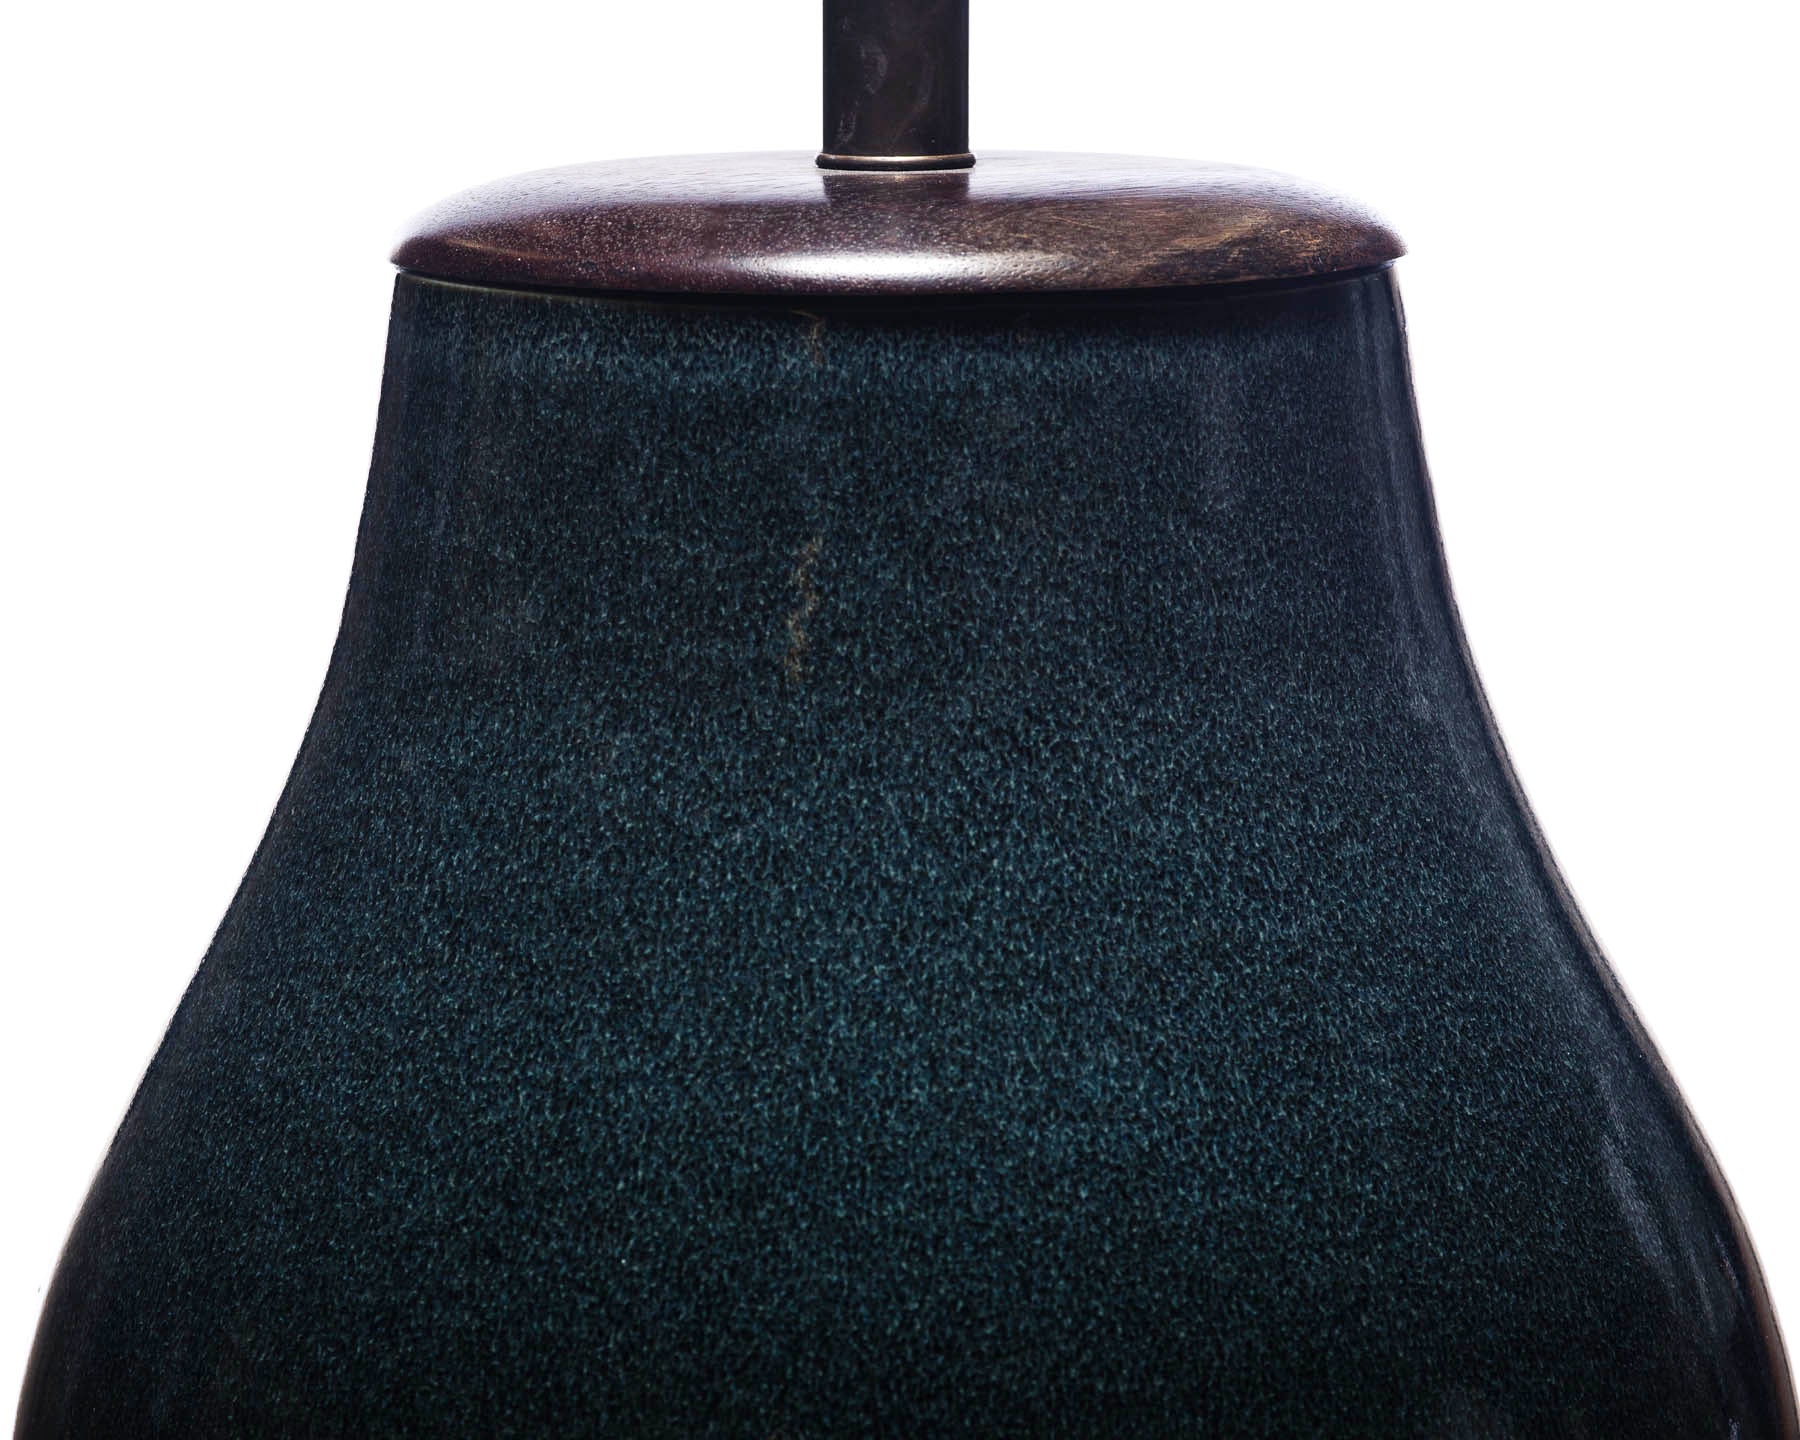 Legacy Lillian Table Lamp in Ocean Blue Textured Glaze with Rosewood Cap